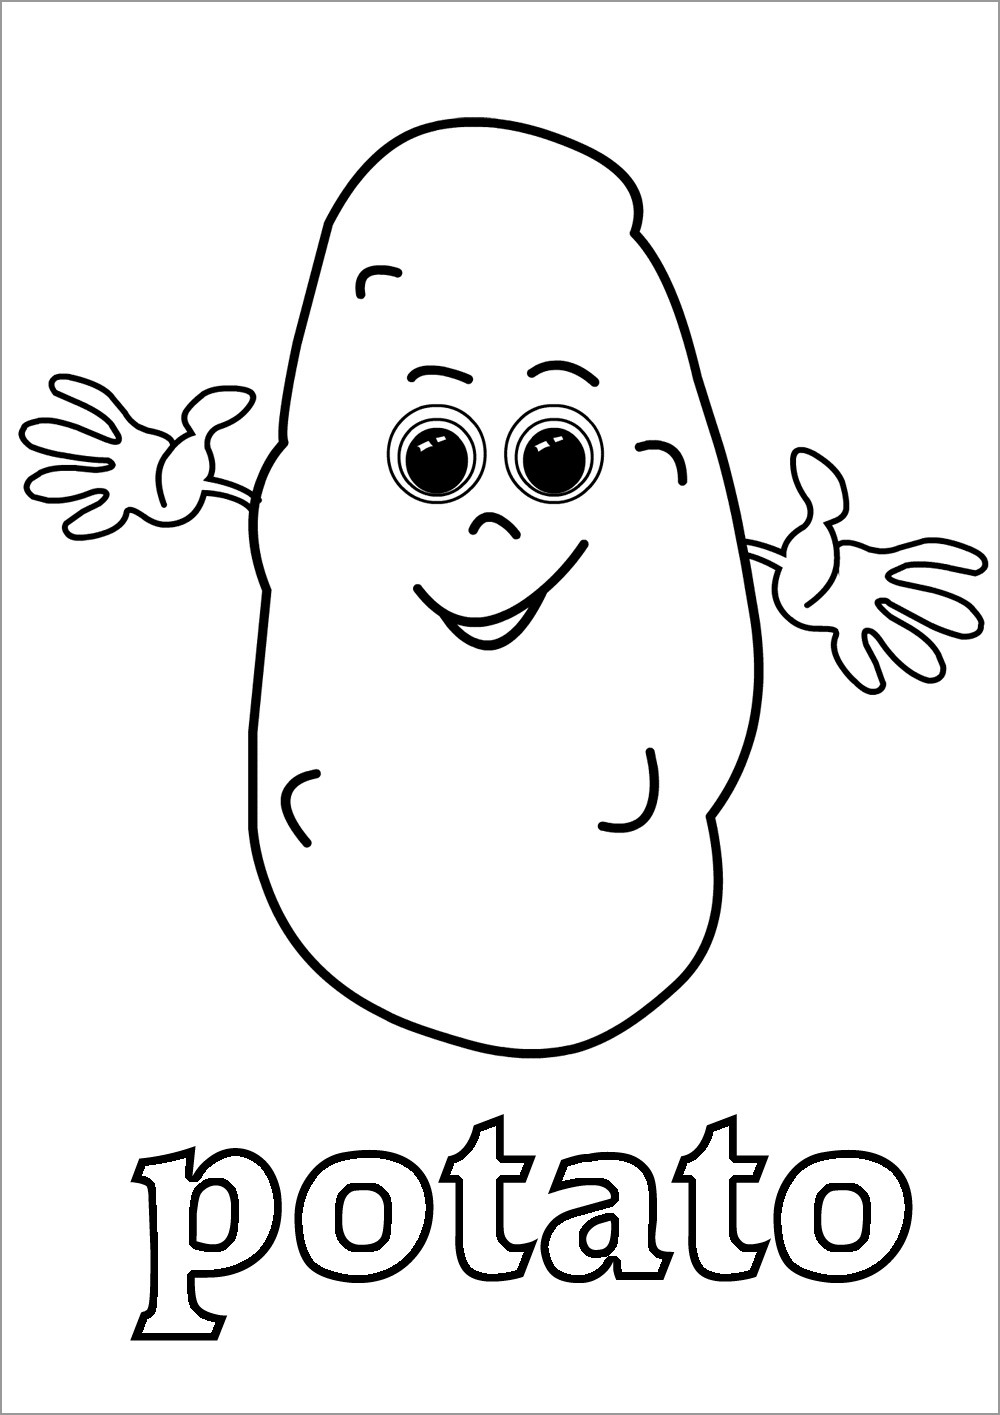 Cartoon Potatoes Coloring Page for Kids